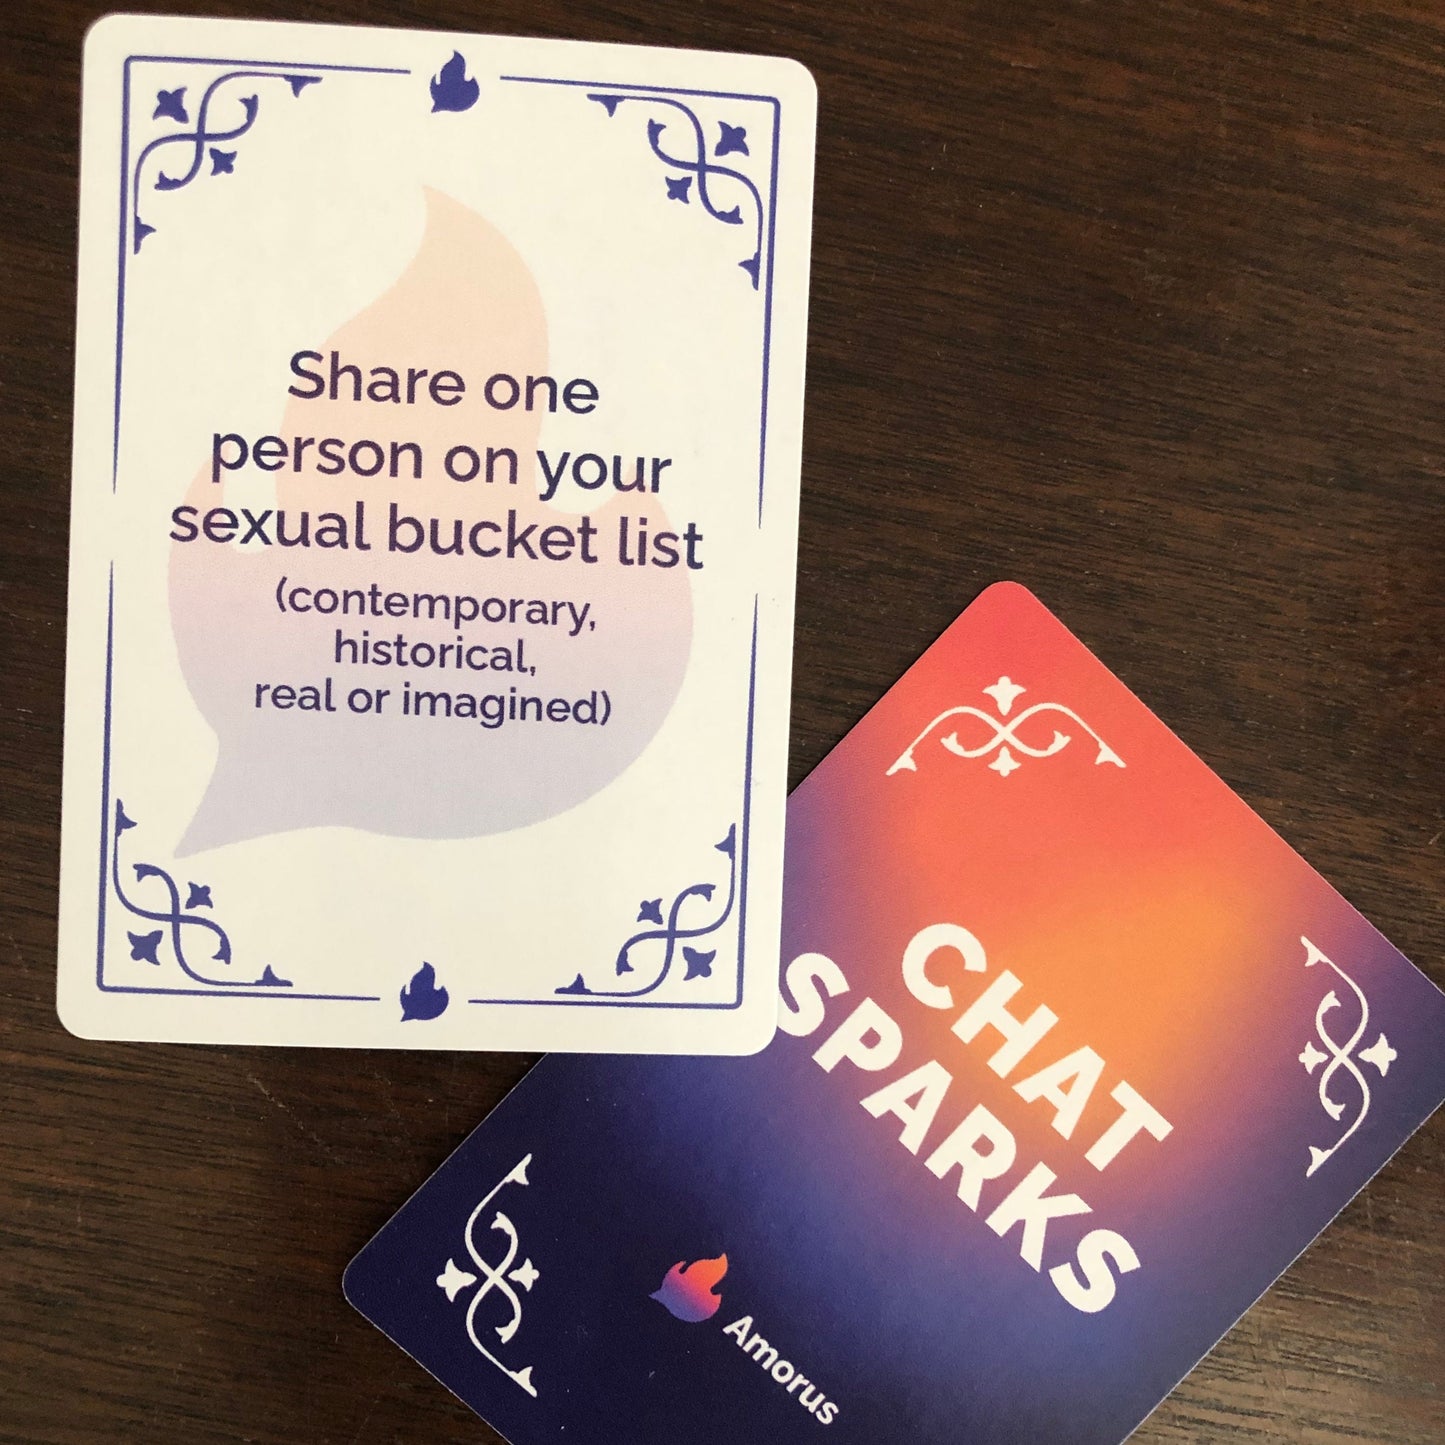 Image of Chat Sparks game card on table. Card reads "Share one person on your sexual bucket list (contemporary, historical, real or imagined)."